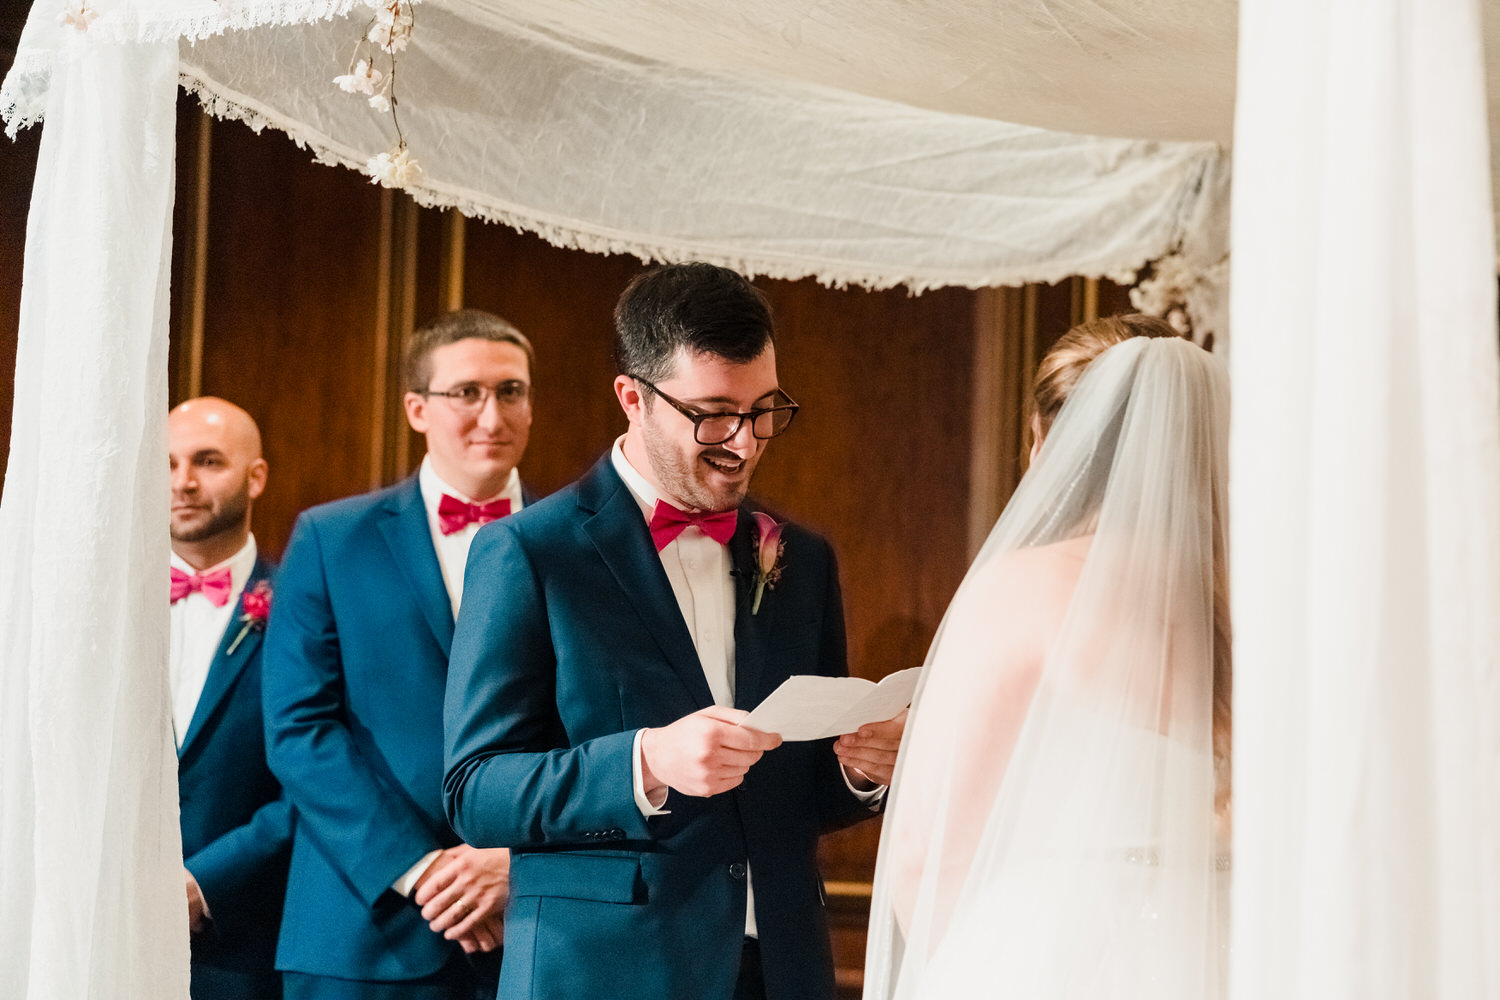 a man in a suit reading a paper to a woman in a wedding dress.